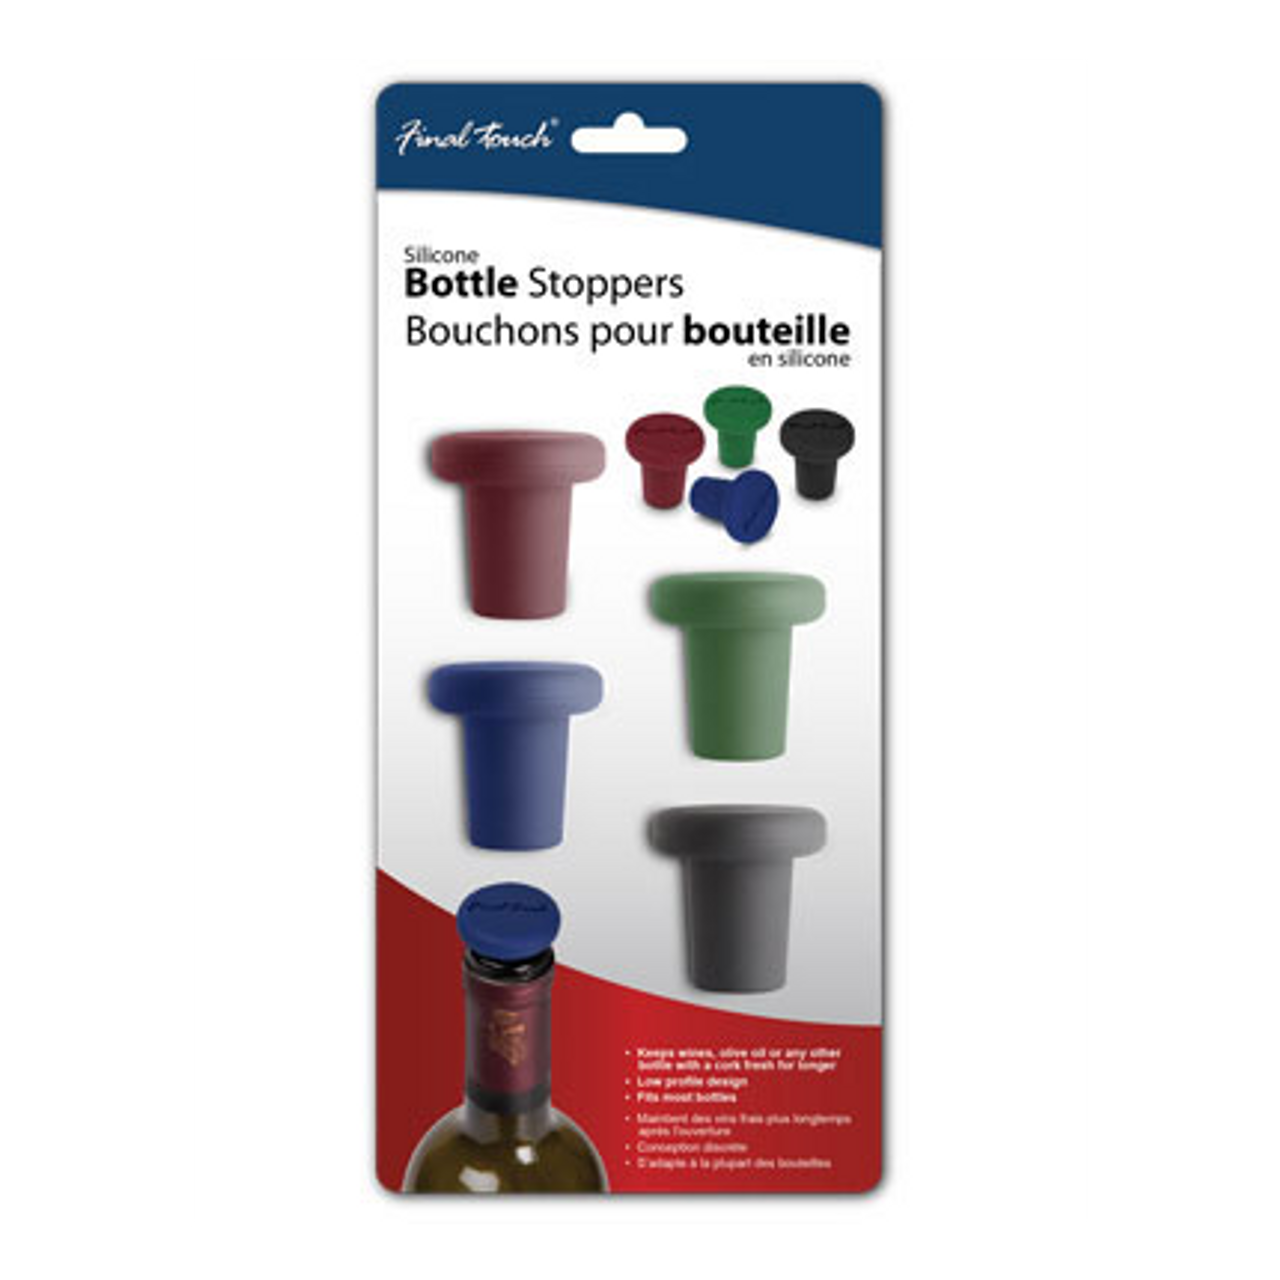 https://cdn11.bigcommerce.com/s-cznxq08r7/images/stencil/1280x1280/products/2514/6416/fta1847-final-touch-bottle-stoppers-2__31557.1590770494.png?c=1